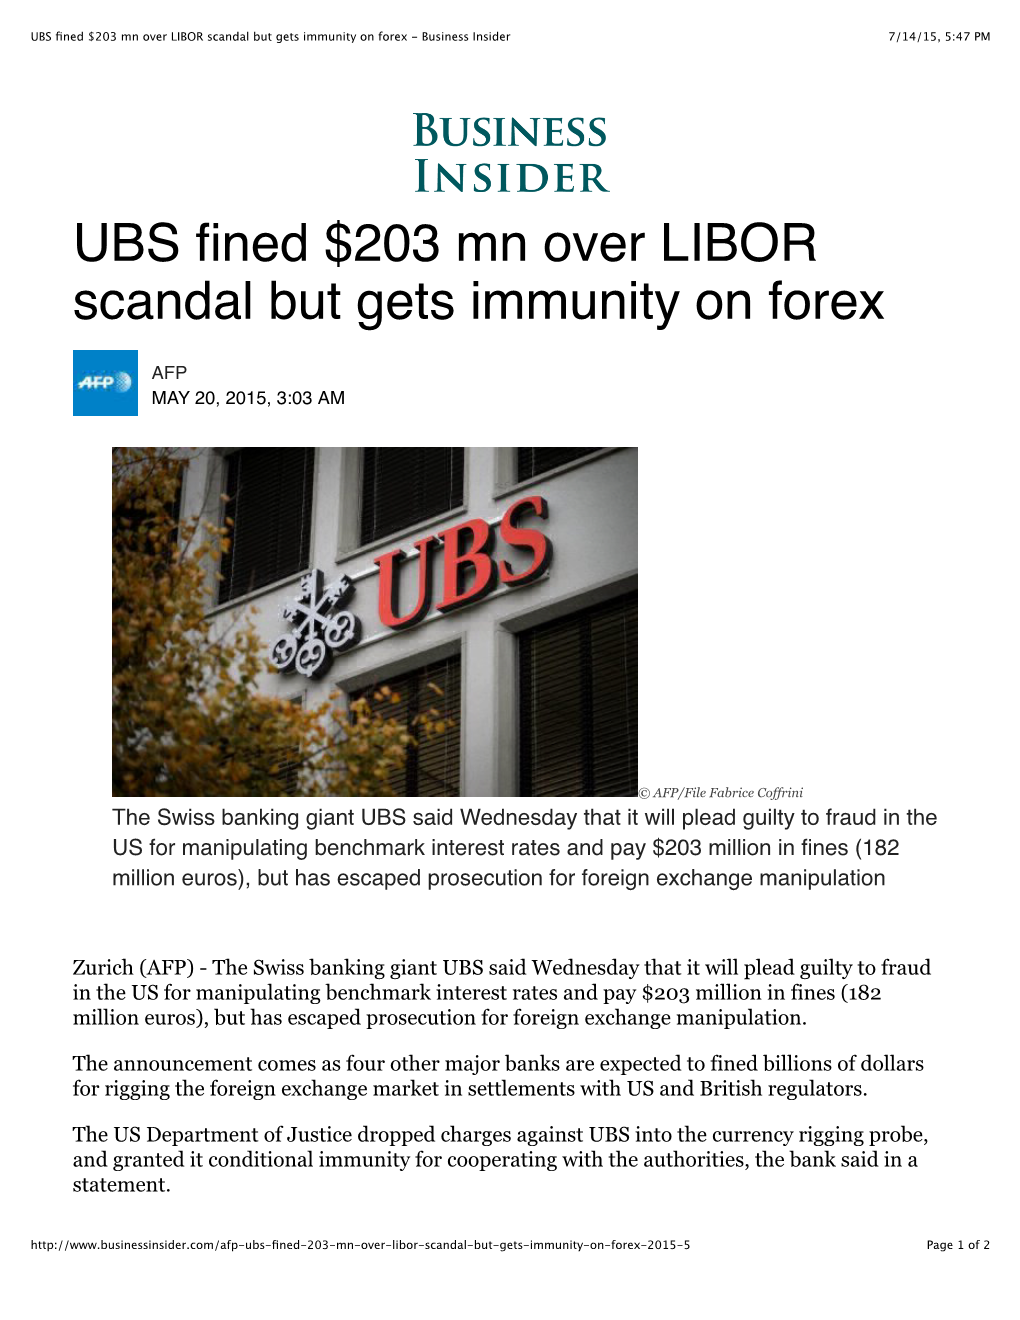 UBS Fined $203 Mn Over LIBOR Scandal but Gets Immunity on Forex